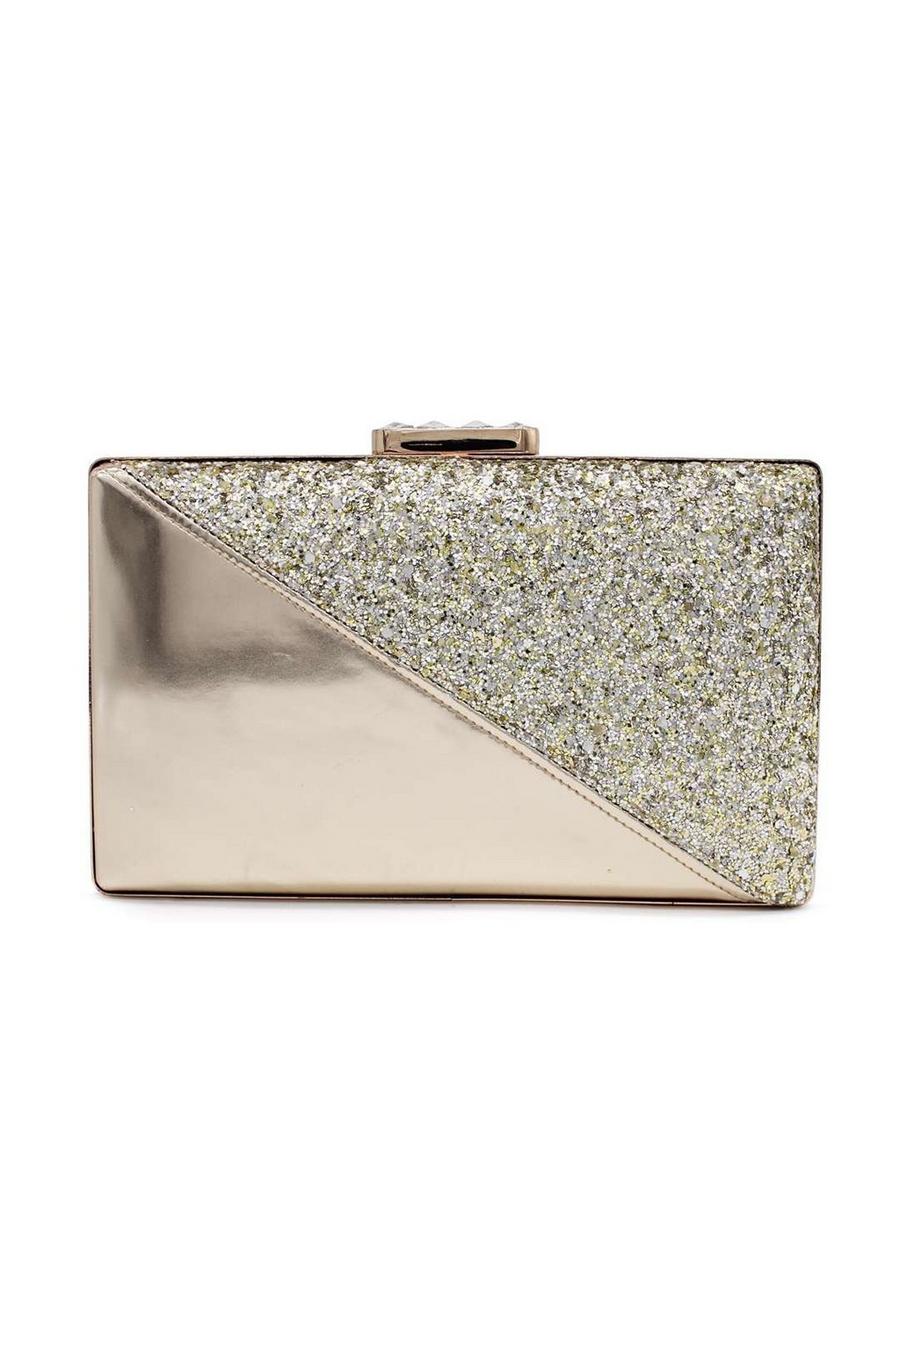 Gold Luxury Looking Half Glossy Half Glitter Evening Clutch Bag image number 1